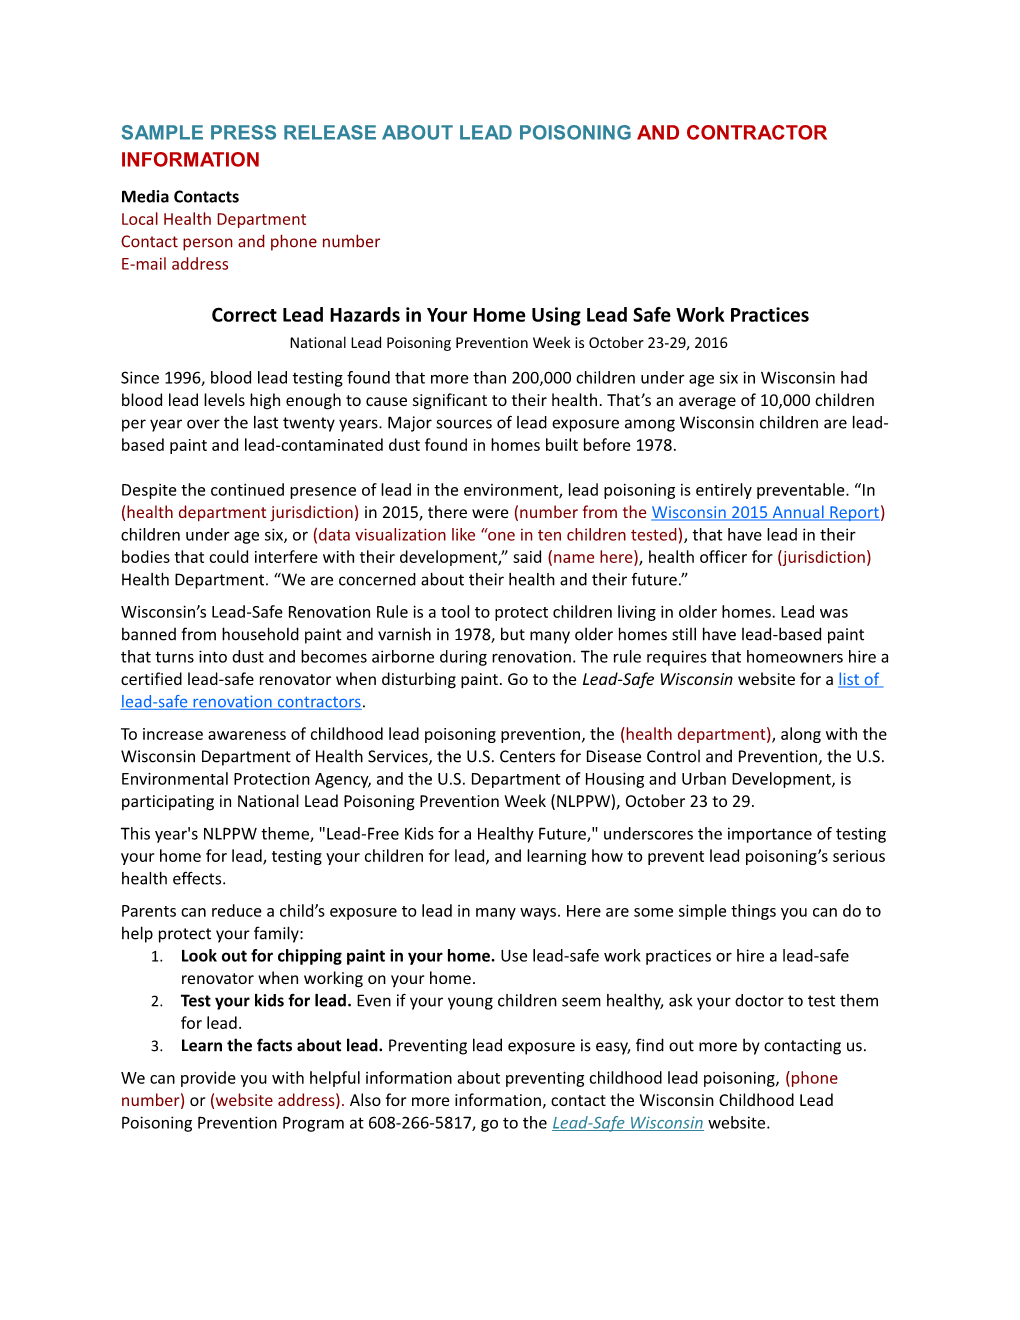 Sample Press Release About Lead Poisoning and Contractor Information